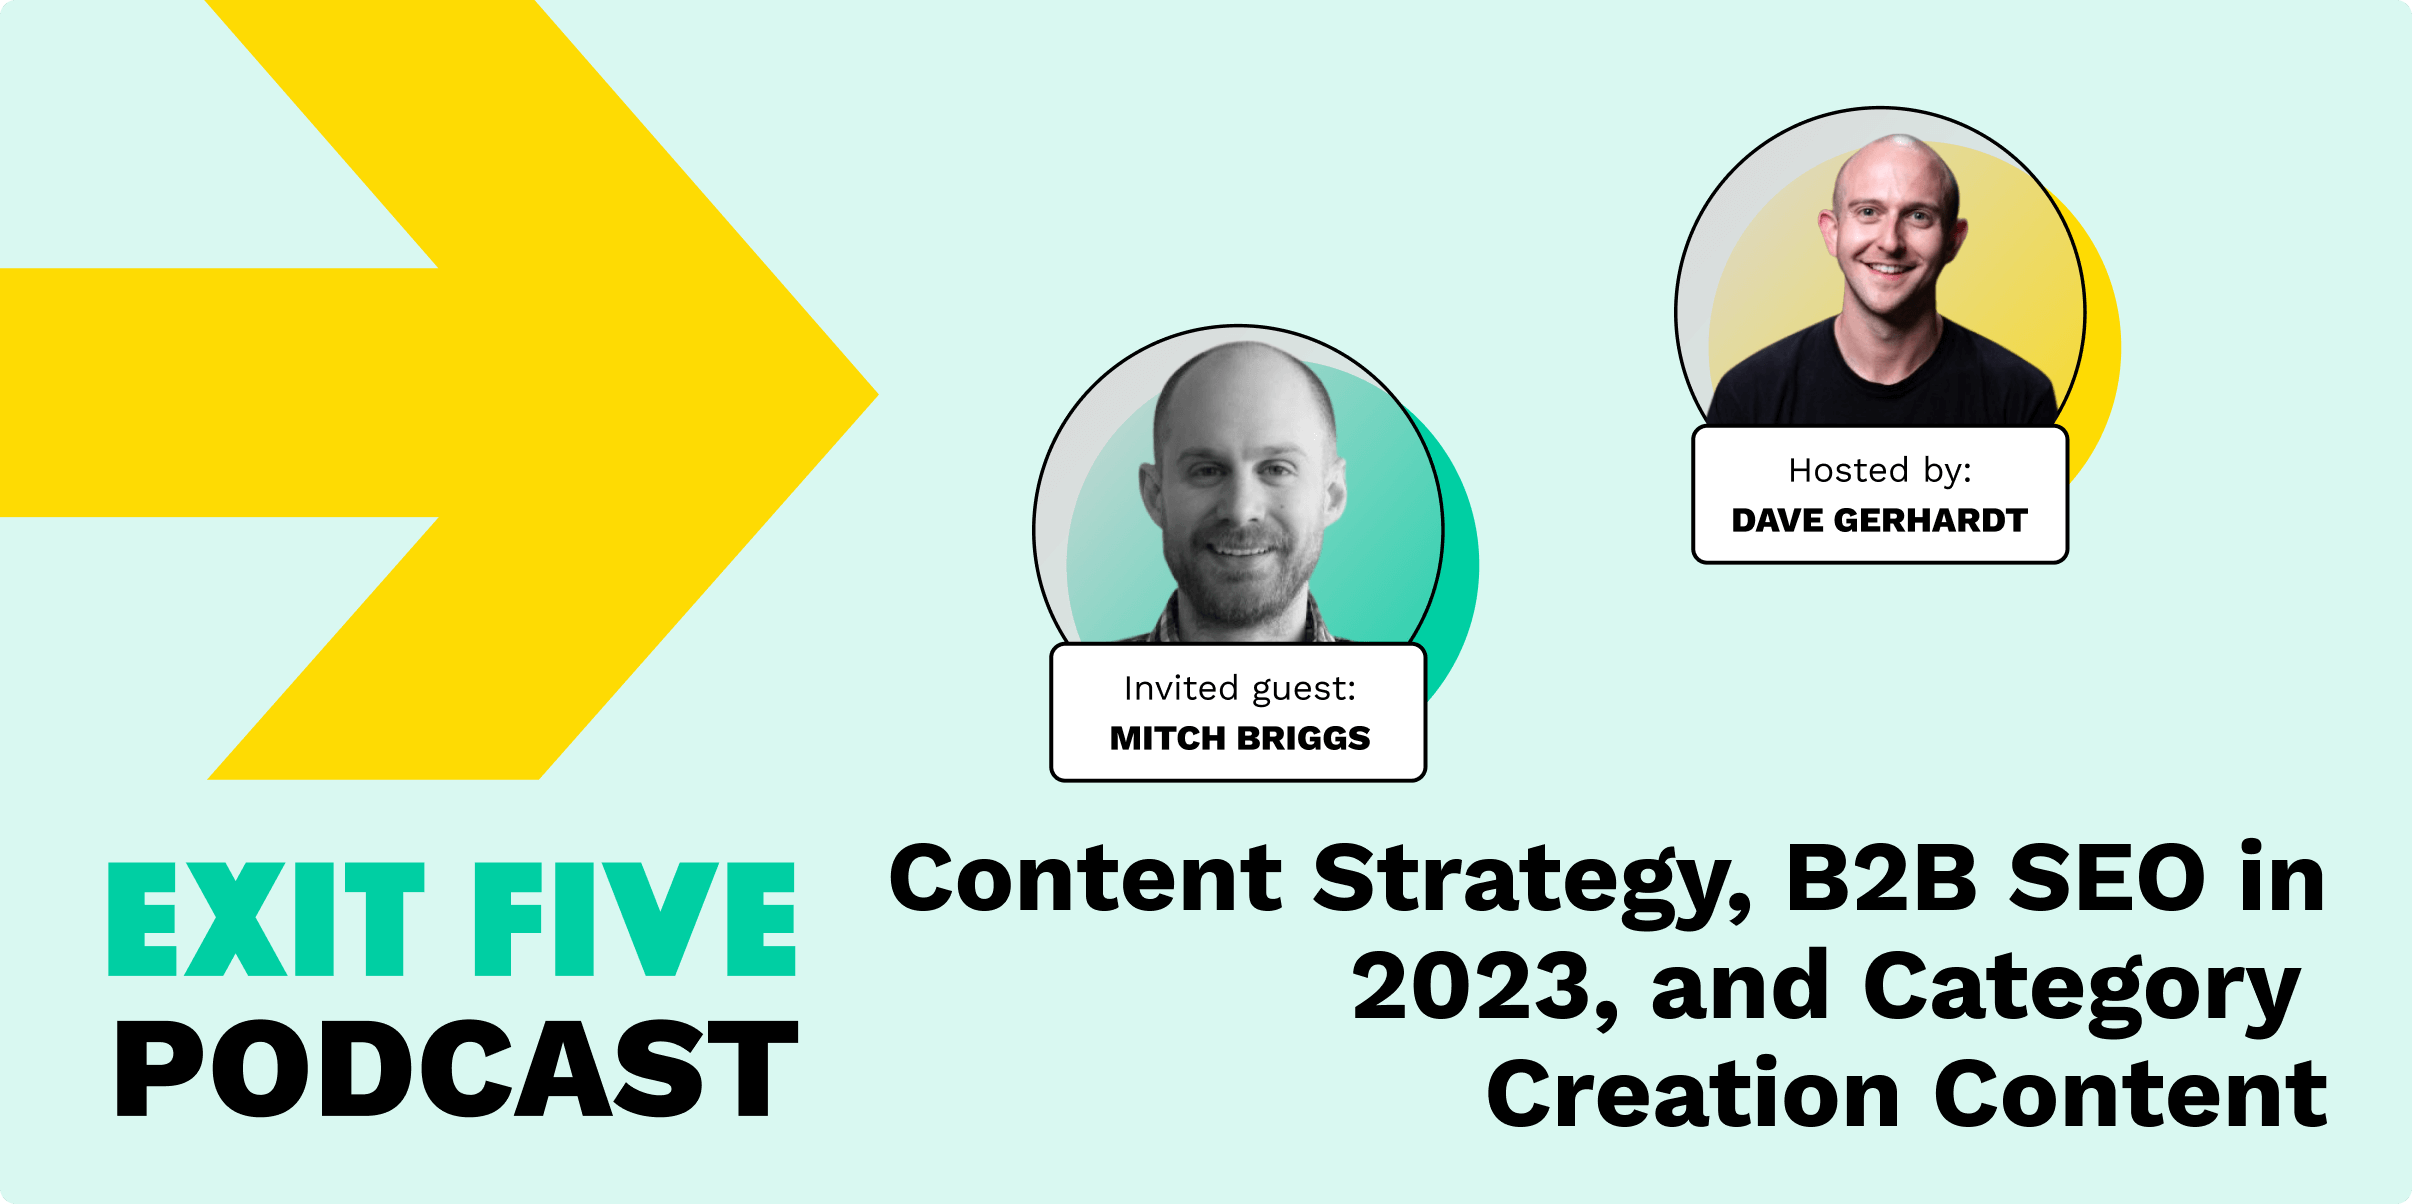 #92: Content Strategy, B2B SEO in 2023, and Category Creation Content with Mitch Briggs (SEO Success Manager at Demandwell)